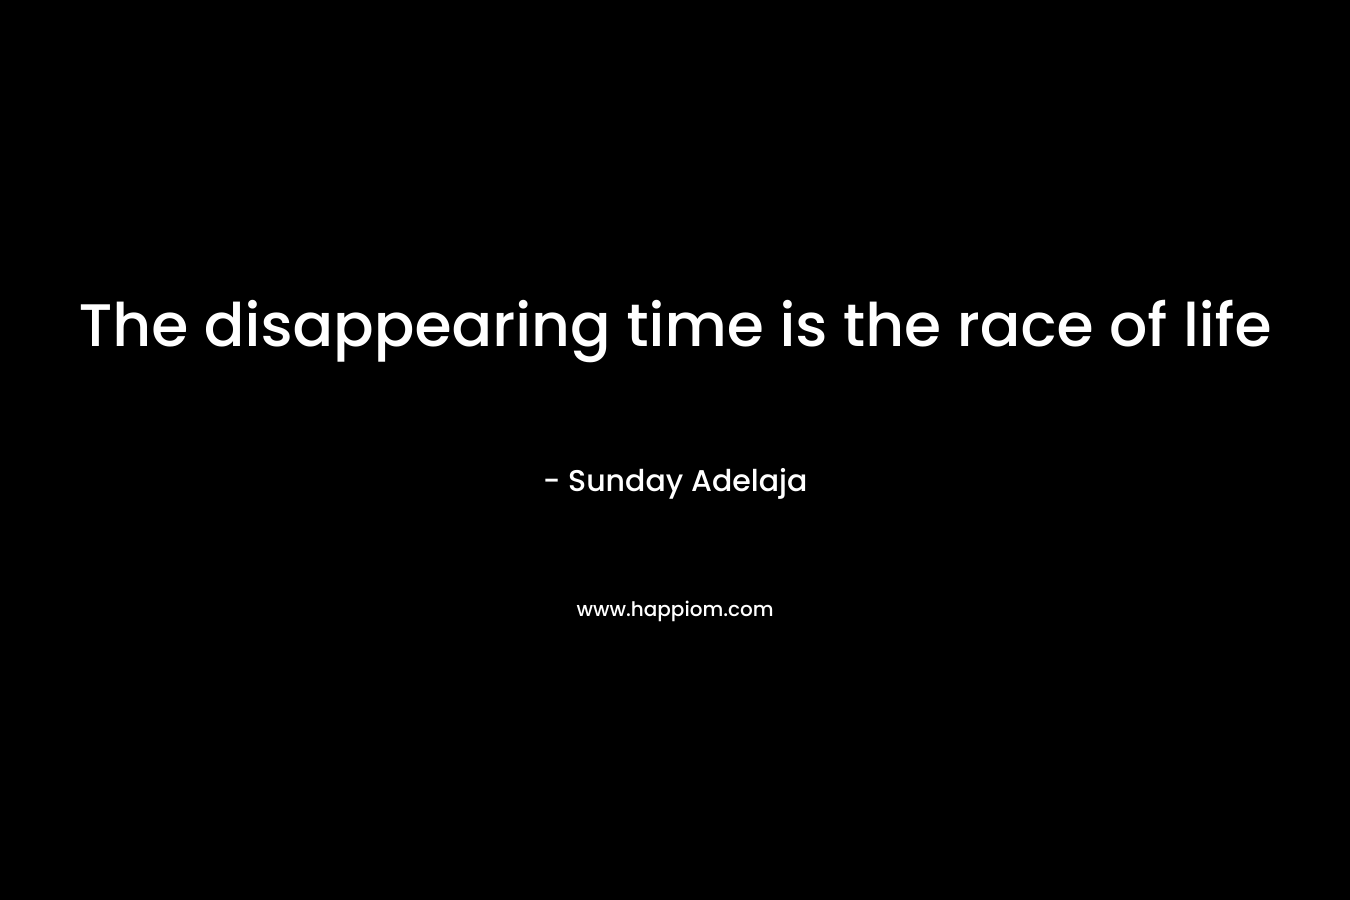 The disappearing time is the race of life